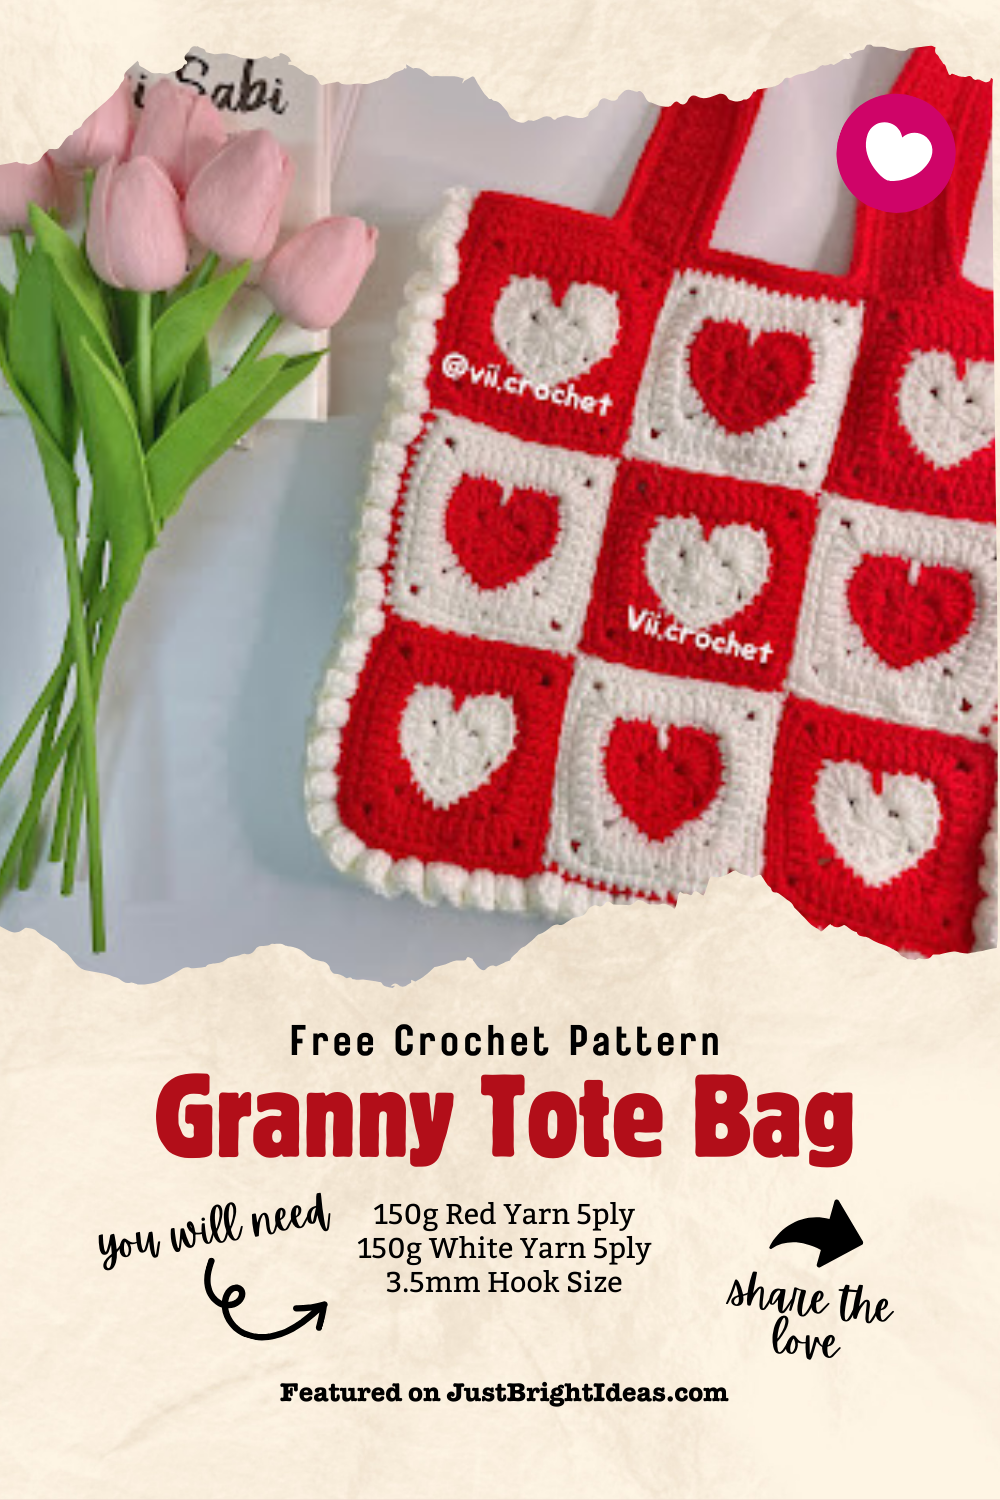 Level up your crochet game with our Heart Granny Square Tote Bag pattern! 💖🌟 Perfect for daily use, featuring a stunning heart design that's sure to charm. Handmade with love using your favorite yarn and crochet hooks. You need this must-have accessory! 🧶✨ #CrochetPattern #GrannySquareBag #HandmadeFashion